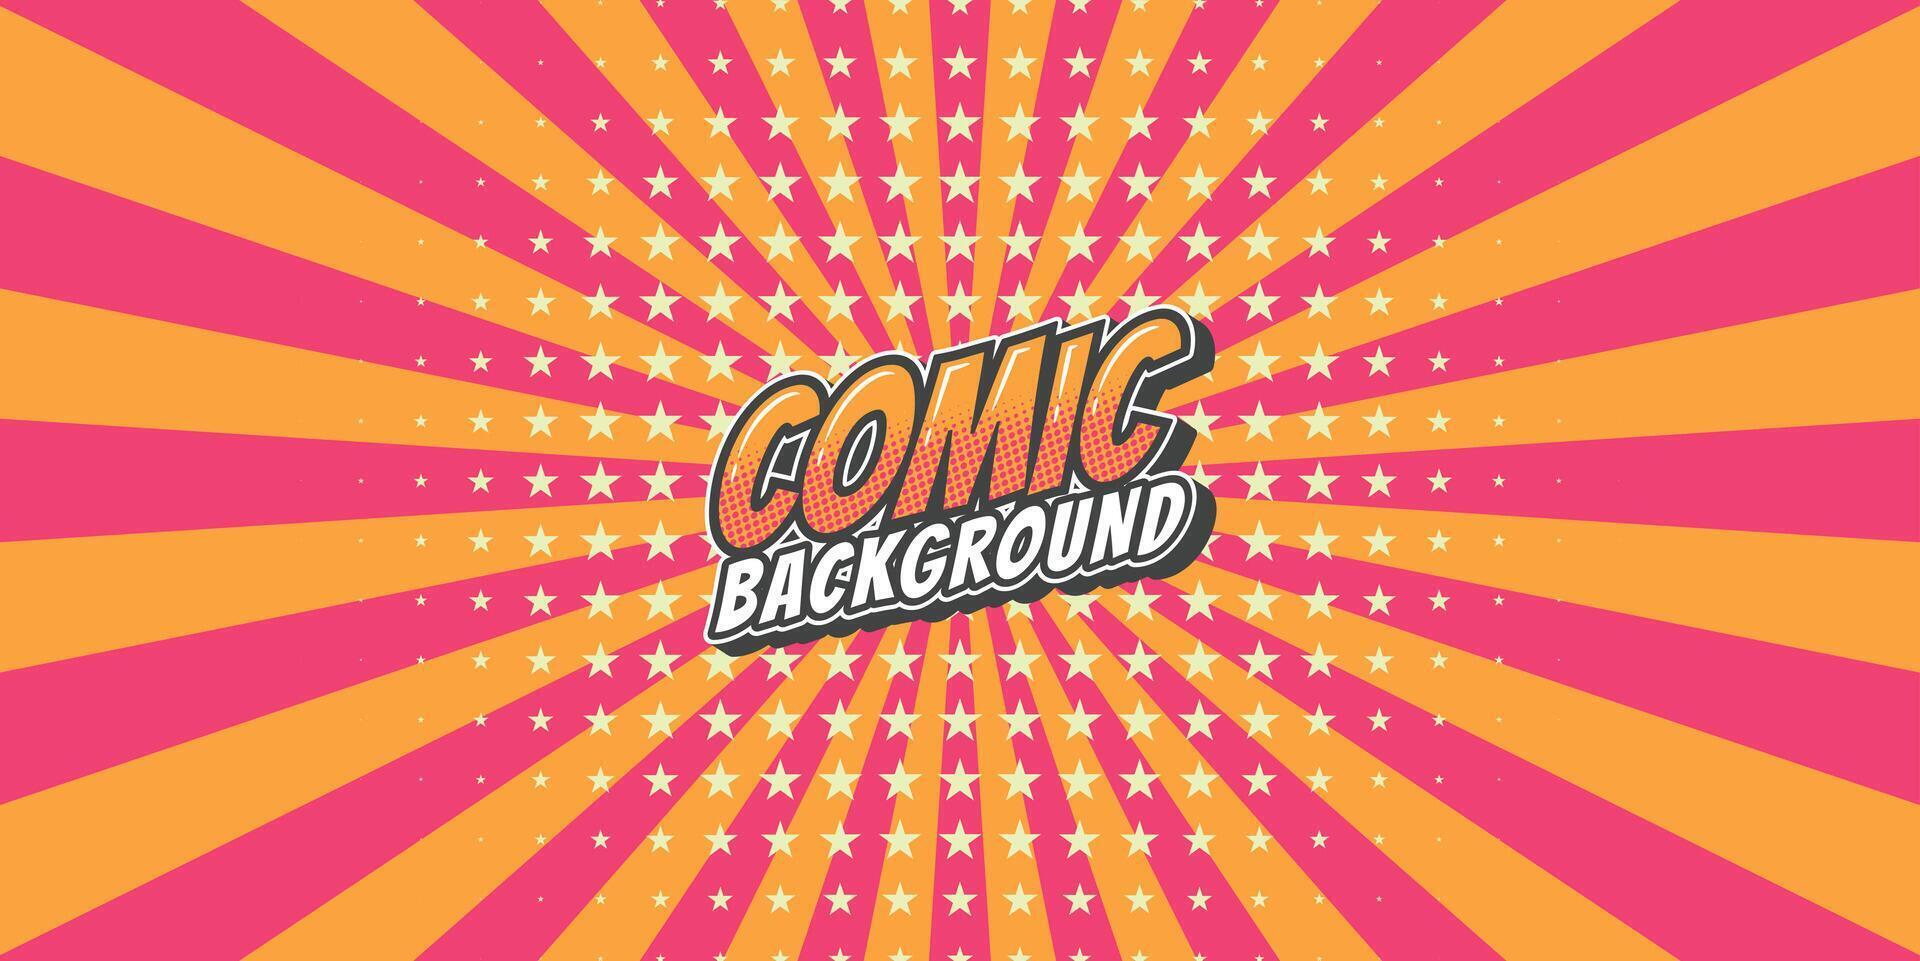 Pop art retro comic rays background. Abstract background with halftone dots design. vector